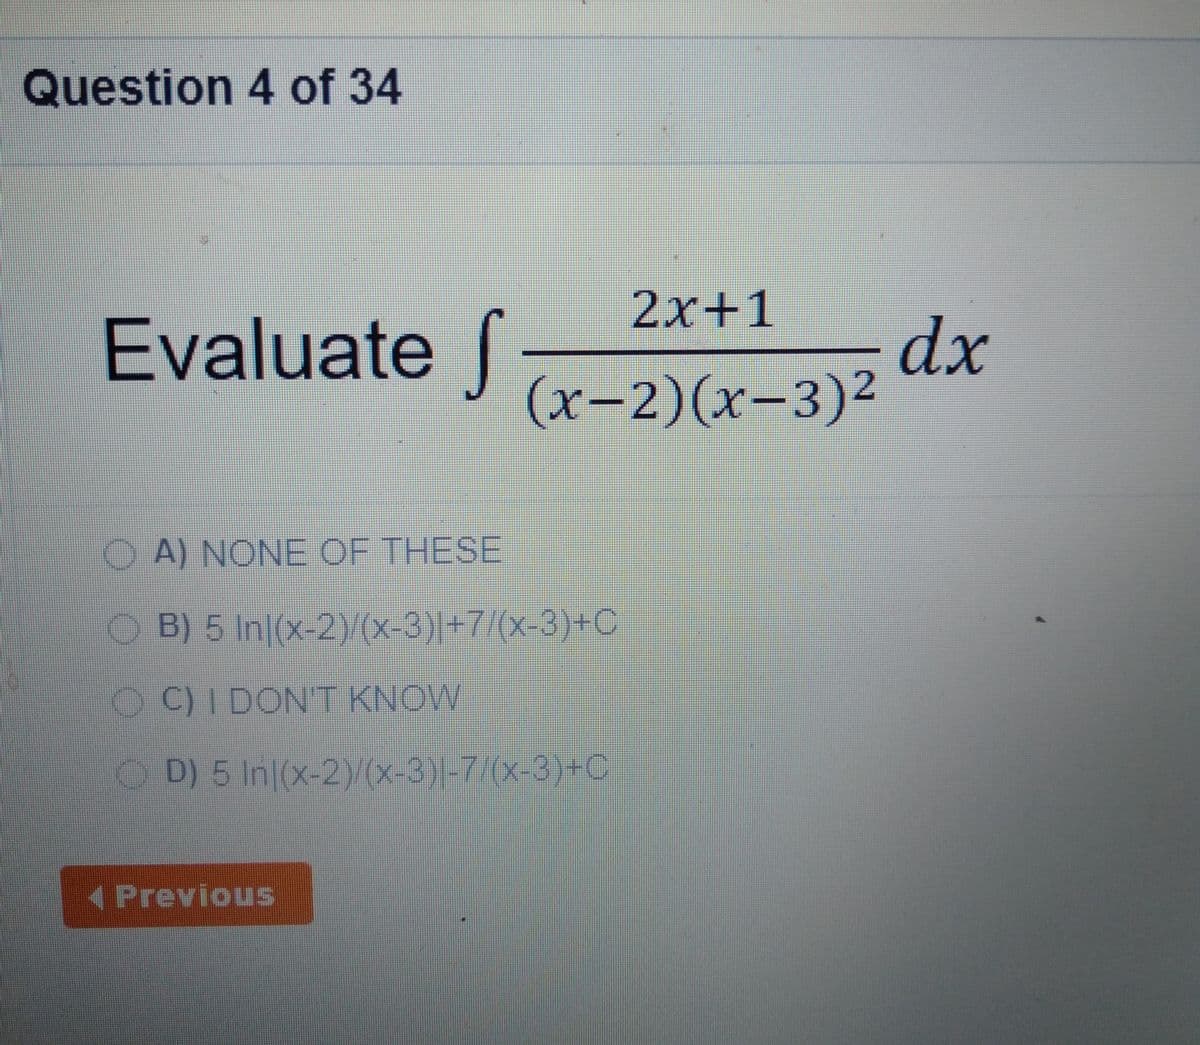 Question 4 of 34
2x+1
Evaluate
dx
(х-2)(х-3)2
A) NONE OF THESE
O B) 5 In|(x-2))/(x-3)|+7/(x-3)+C
OC)IDONT KNOW
OD) 5 In|(x-2)(x-3)|-7/(x-3)+C
(Previous
